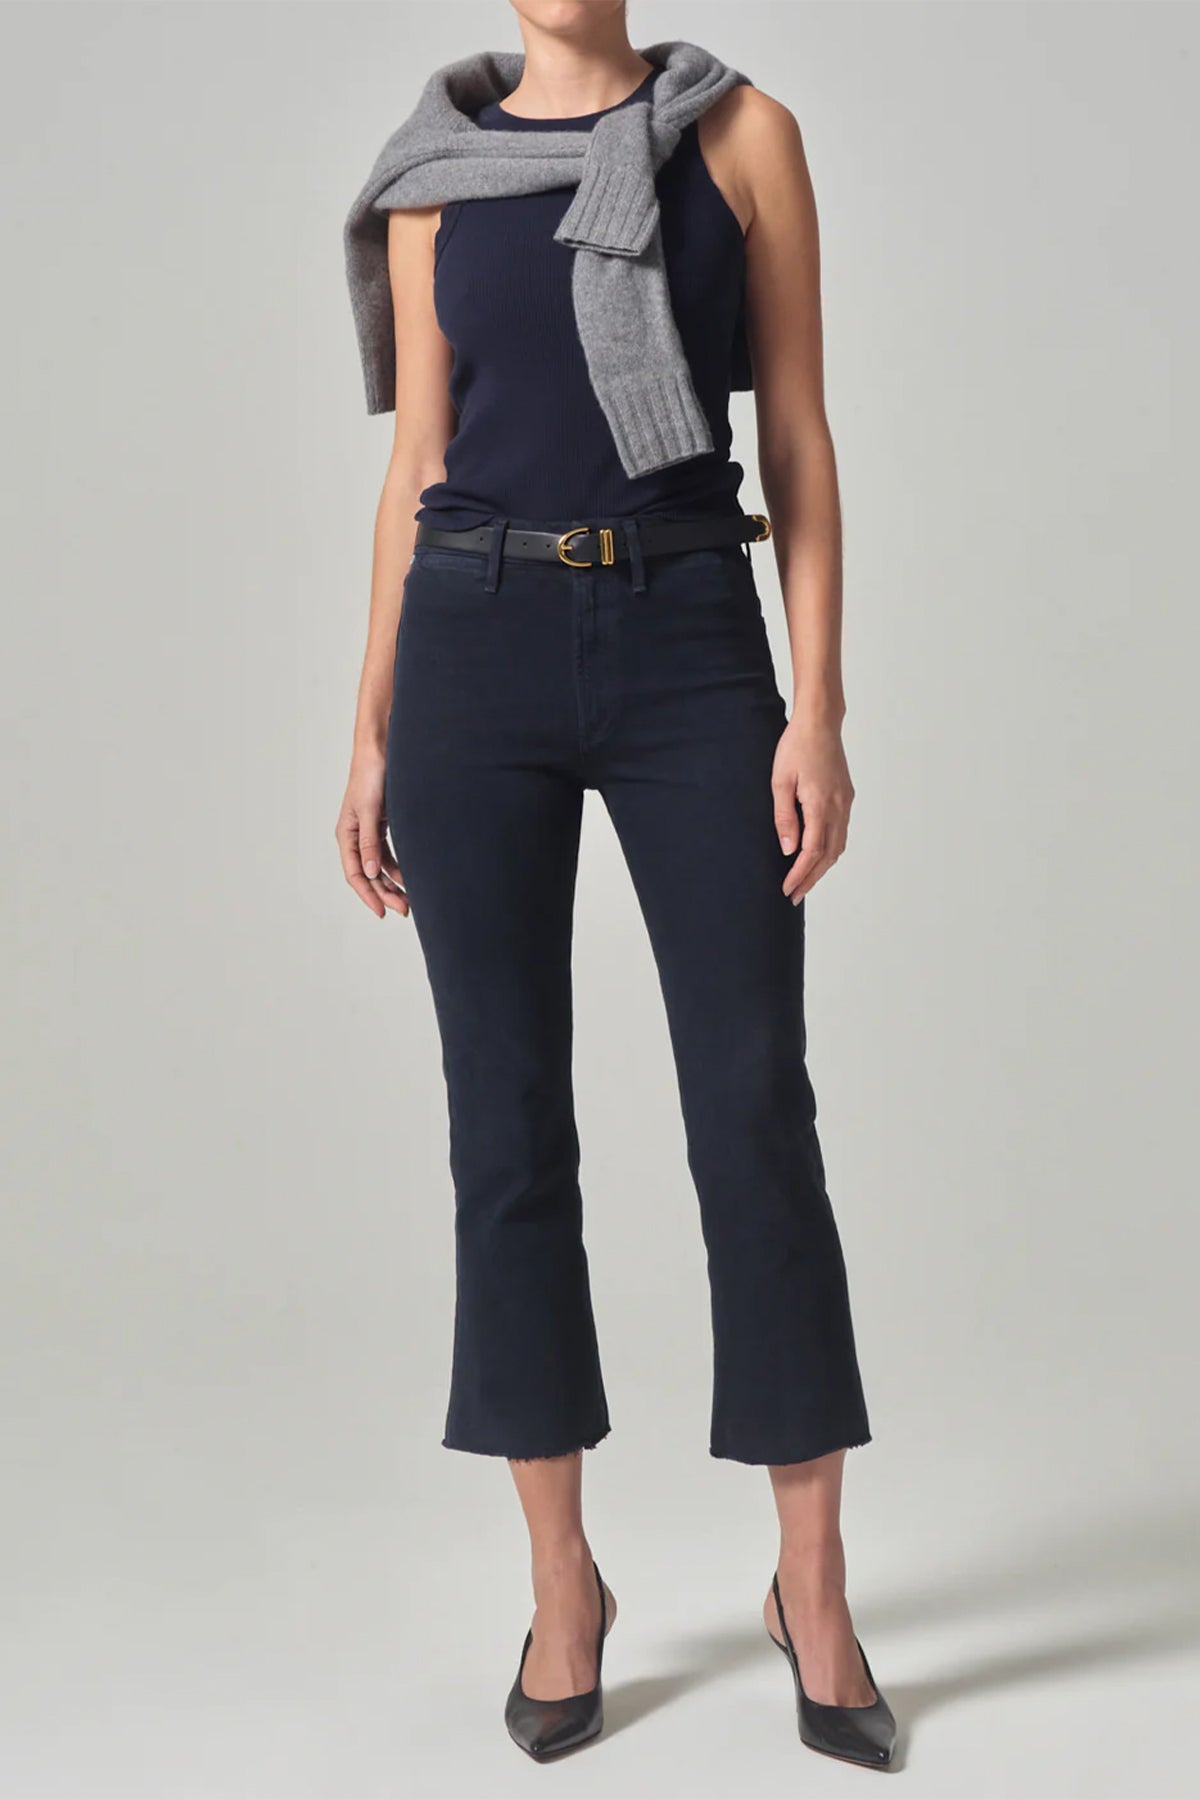 Isola Cropped Trouser in Navy - shop-olivia.com